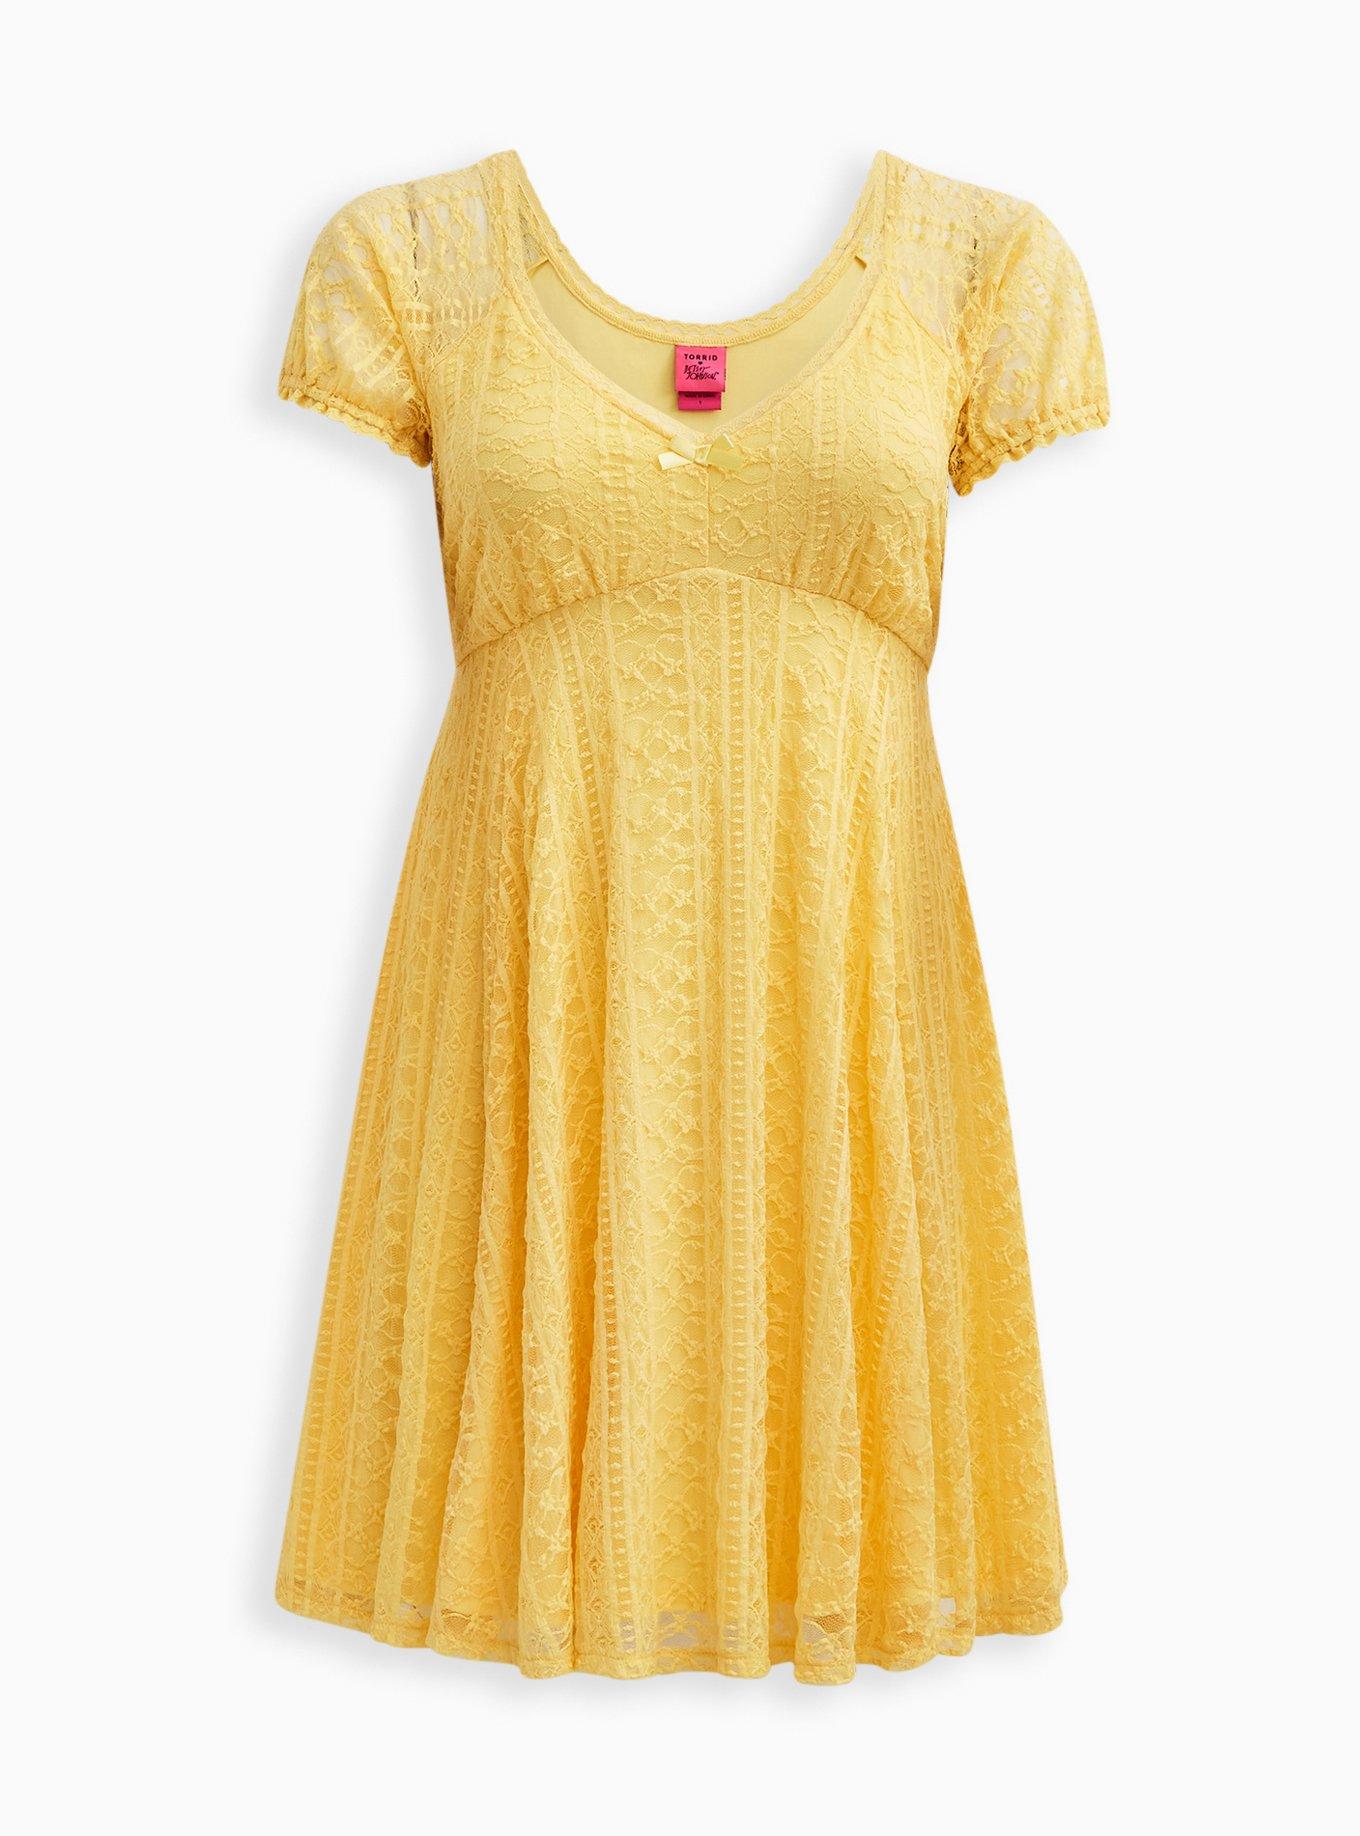 Plus Size - Betsey Johnson Sweetheart Fit & Flare Dress - Lace Striped  Yellow - Torrid